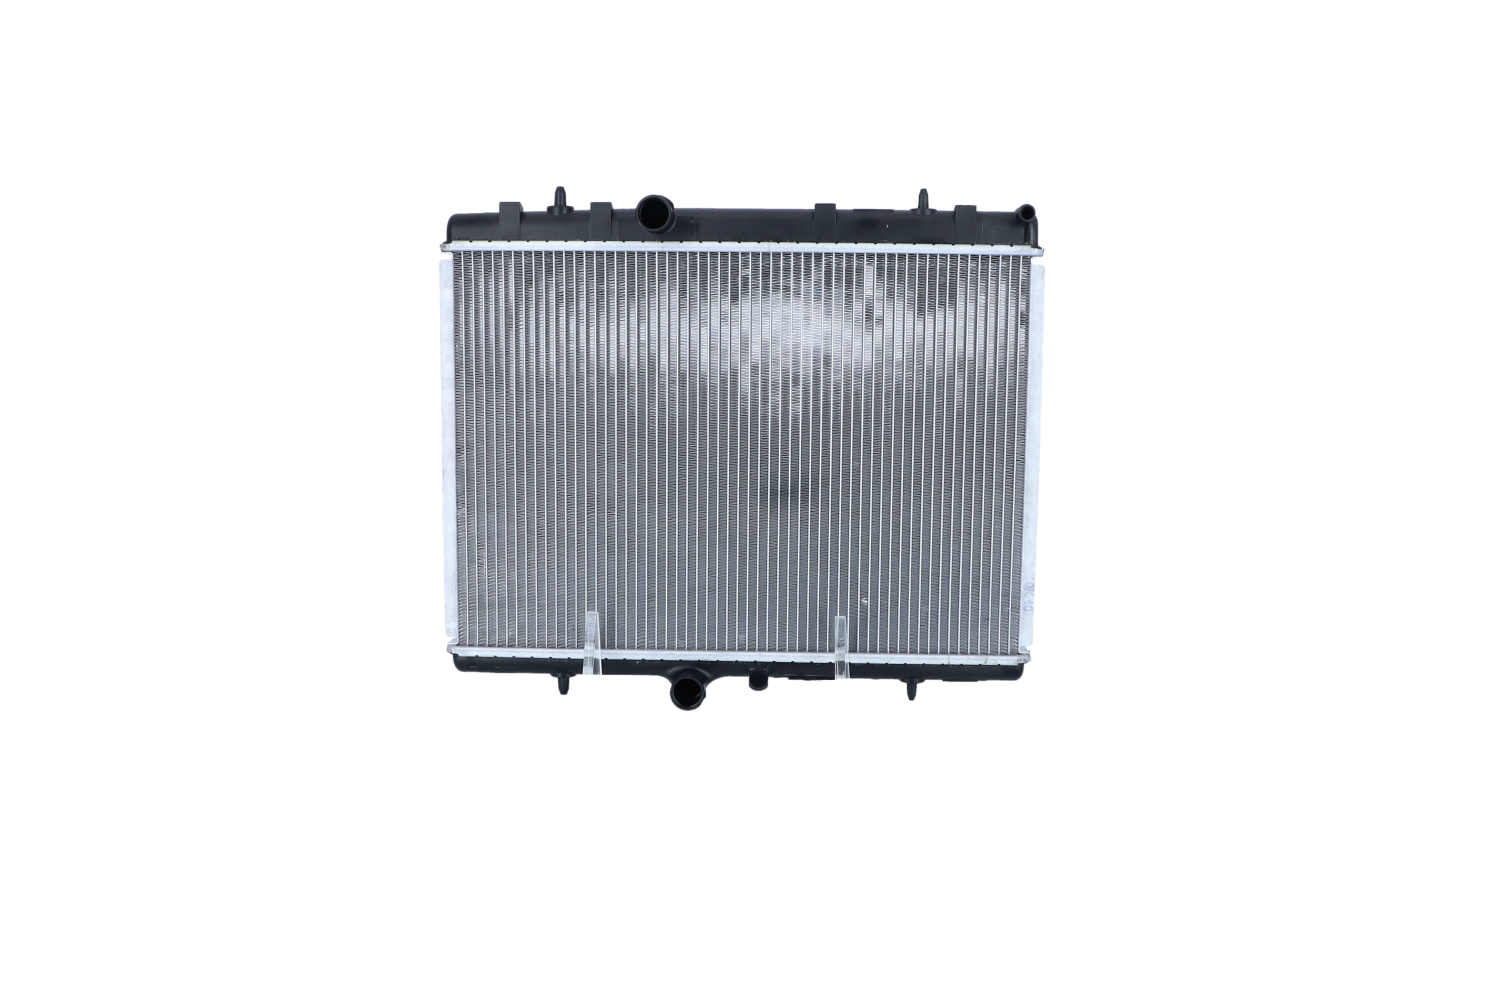 NRF EASY FIT 50437 Engine radiator Aluminium, 554 x 380 x 29 mm, with mounting parts, Brazed cooling fins